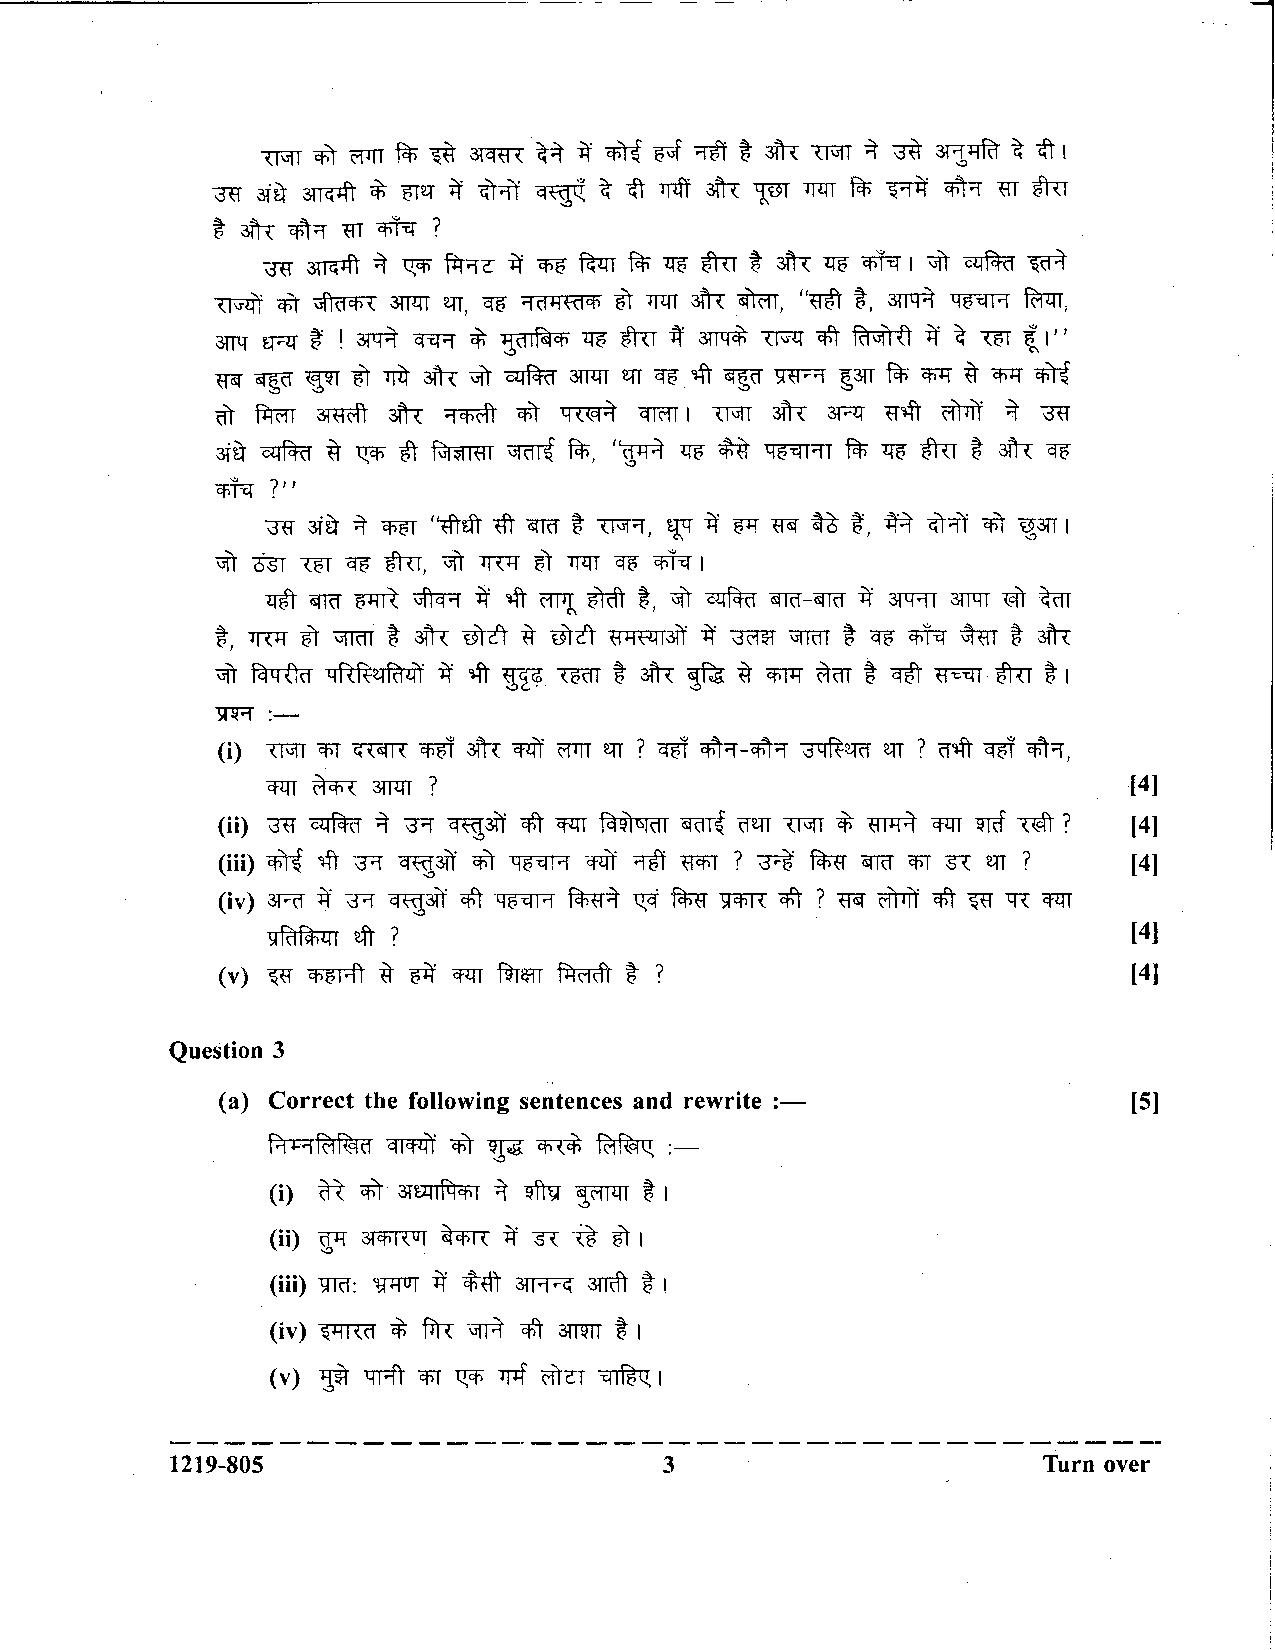 ISC Class 12 Hindi 2019 Question Paper